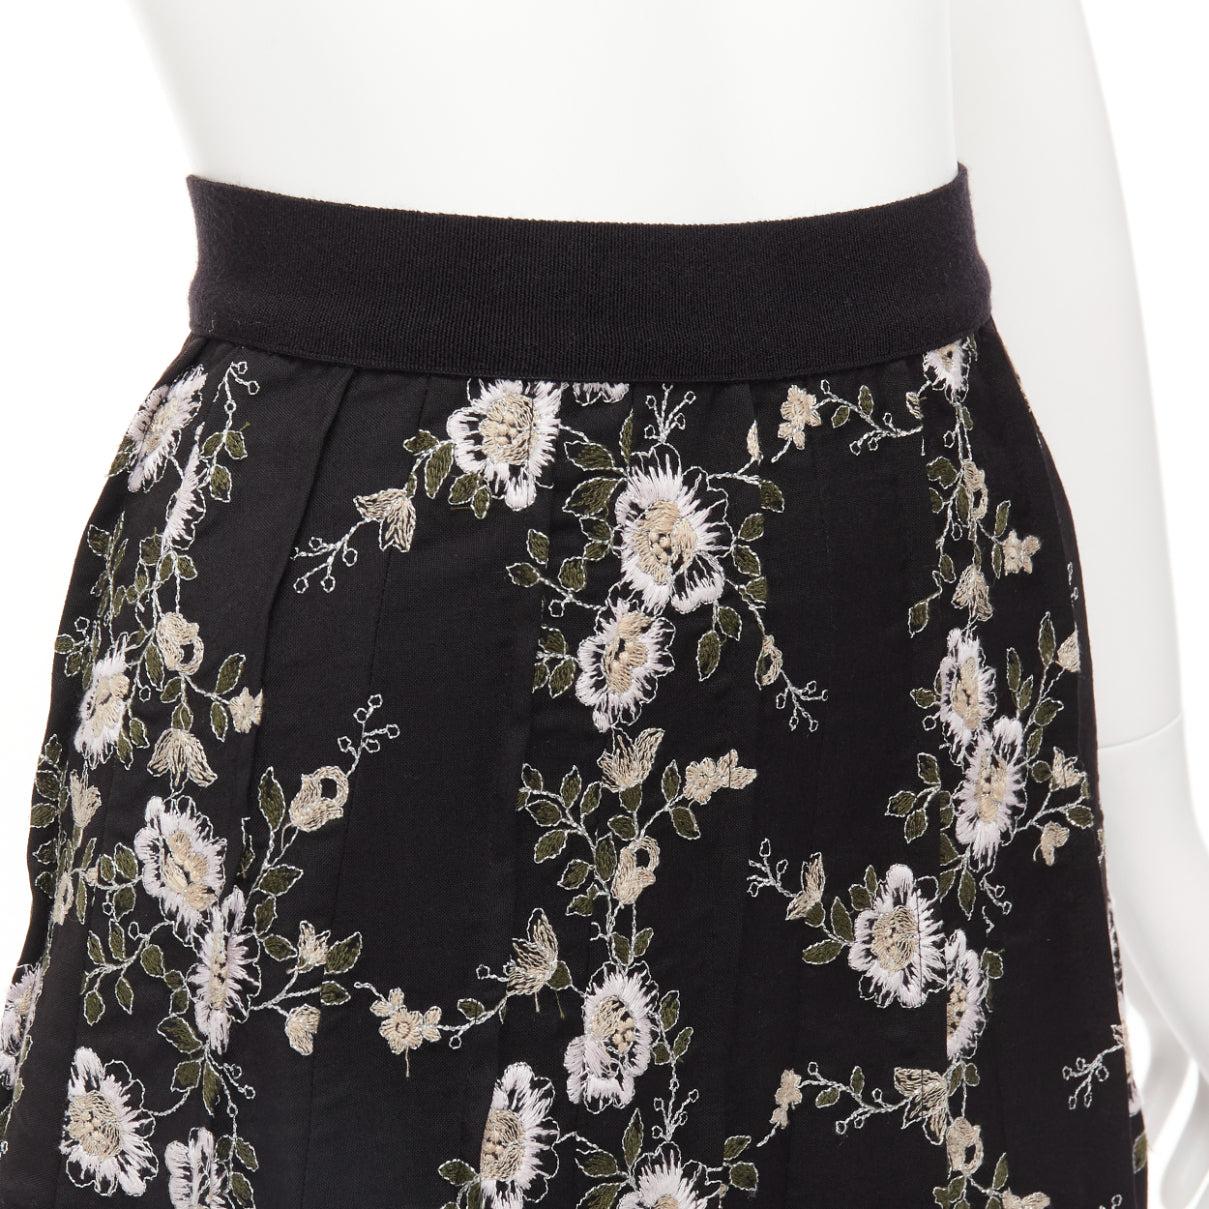 GIAMBATTISTA VALLI black pink floral embroidered 100% wool midi skirt IT38 XS
Reference: LNKO/A02321
Brand: Giambattista Valli
Material: Wool
Color: Black, Pink
Pattern: Floral
Closure: Zip
Lining: Black Fabric
Extra Details: Side zip.
Made in: